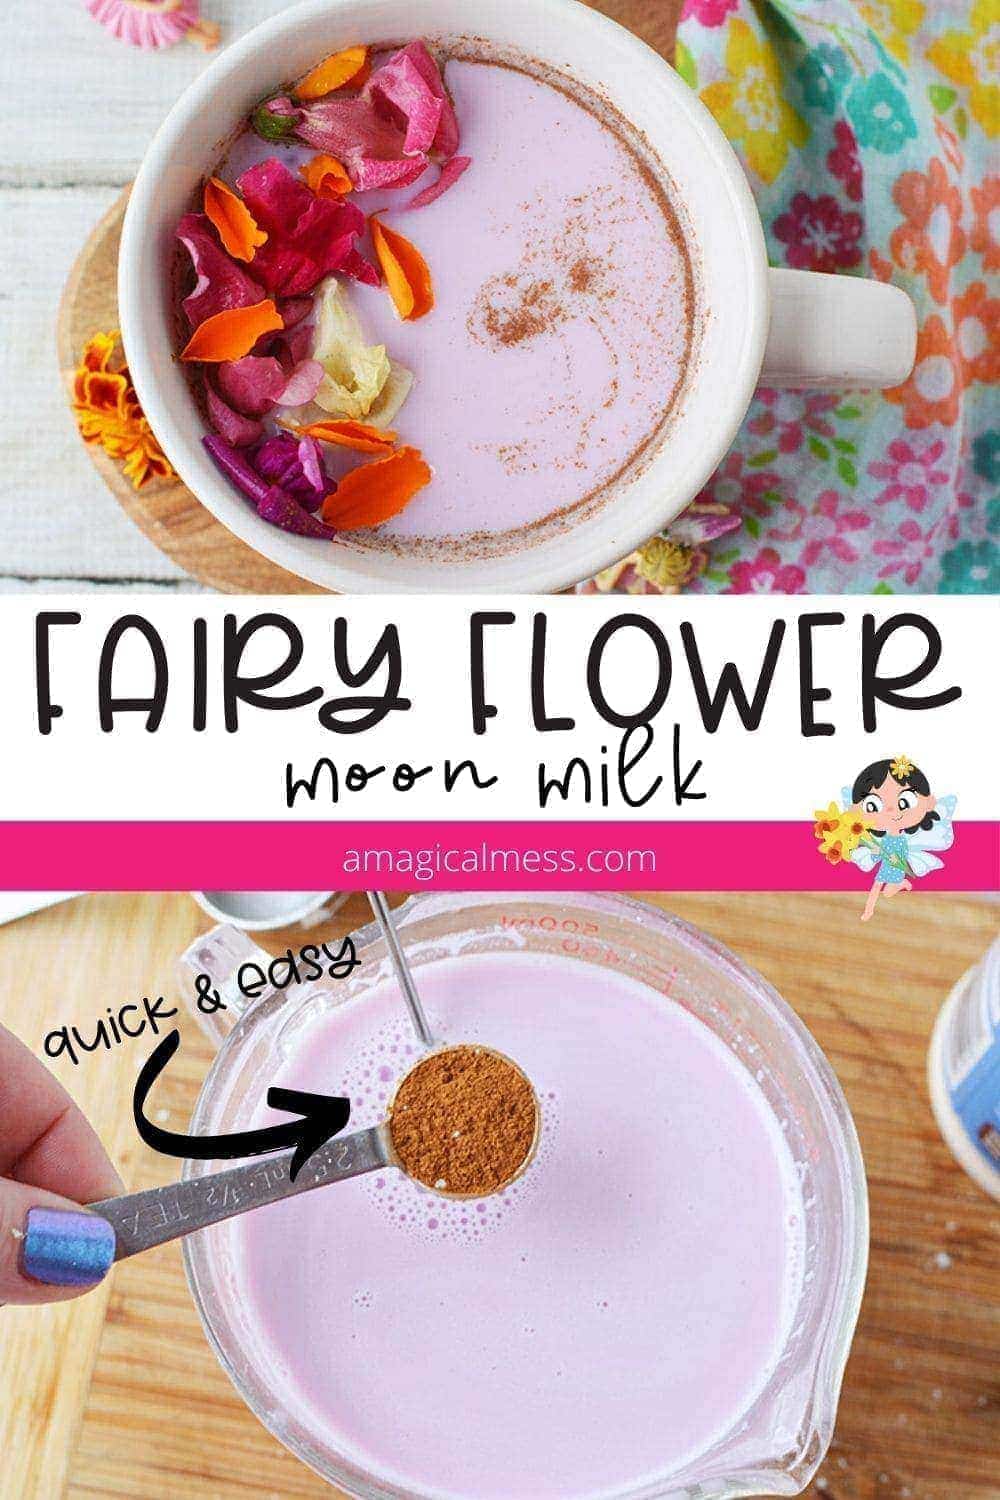 Pink moon milk with flowers on top.